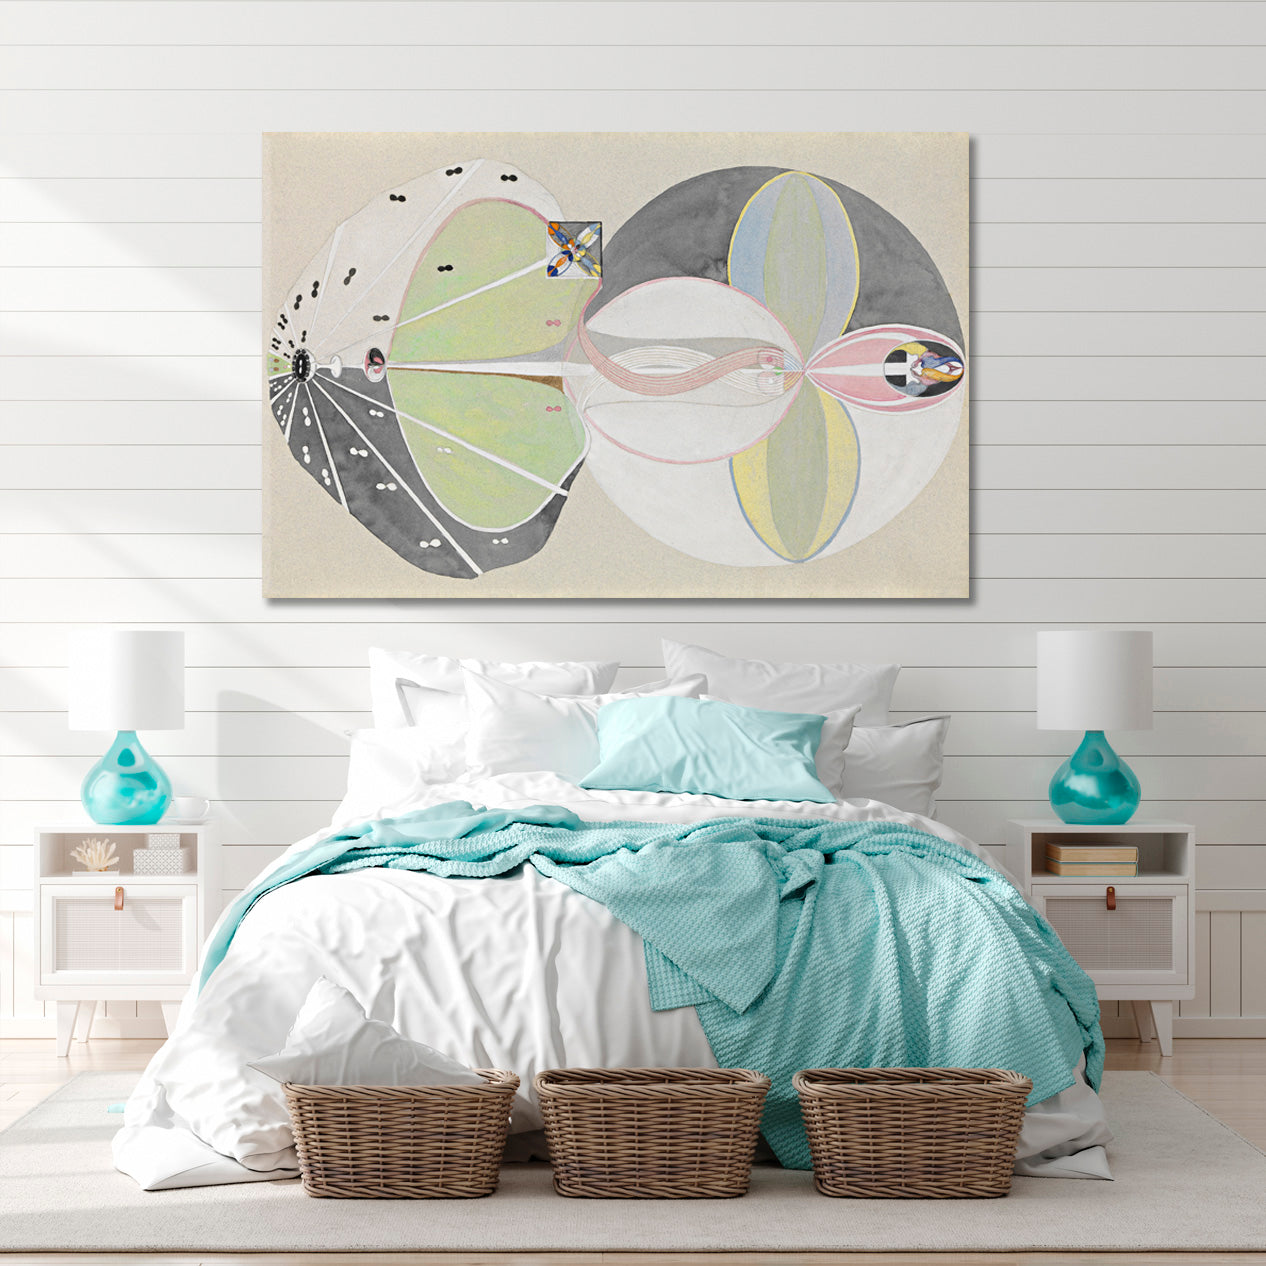 Abstract Geometric Art Incredible Soft Pastel Colors  Modern Canvas Print Abstract Art Print Artesty   